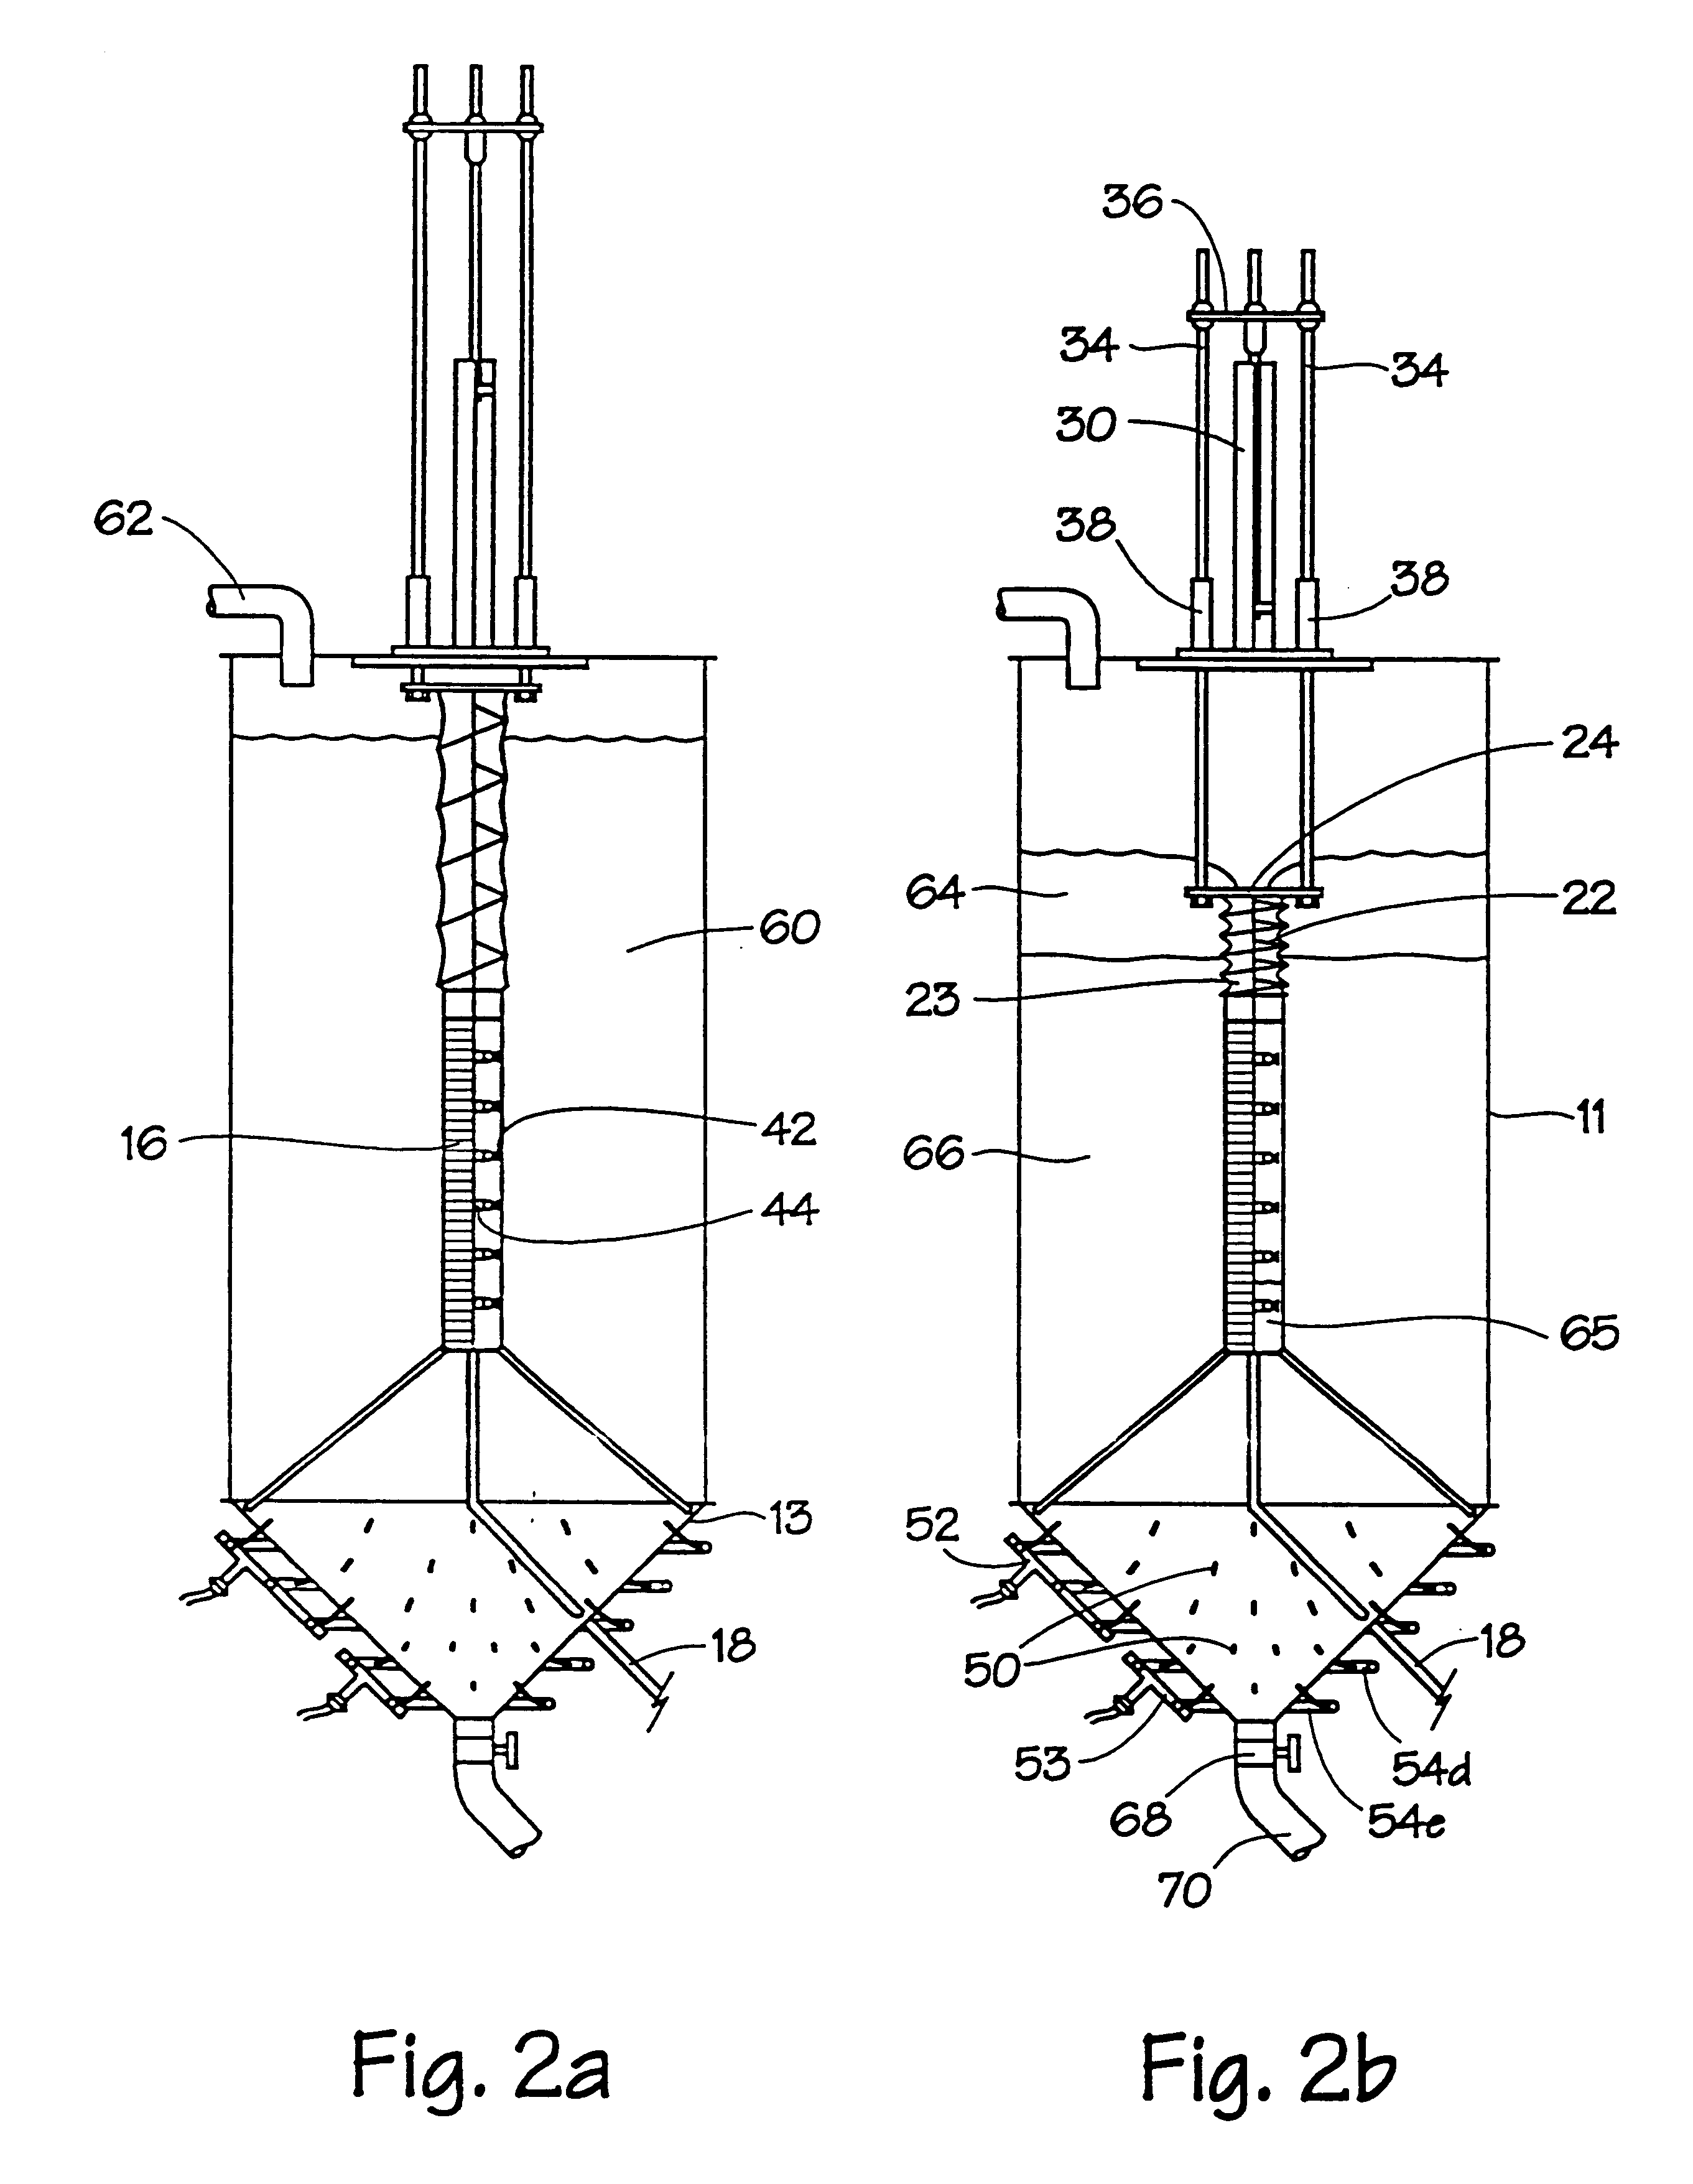 Apparatus for producing high density slurry and paste backfills